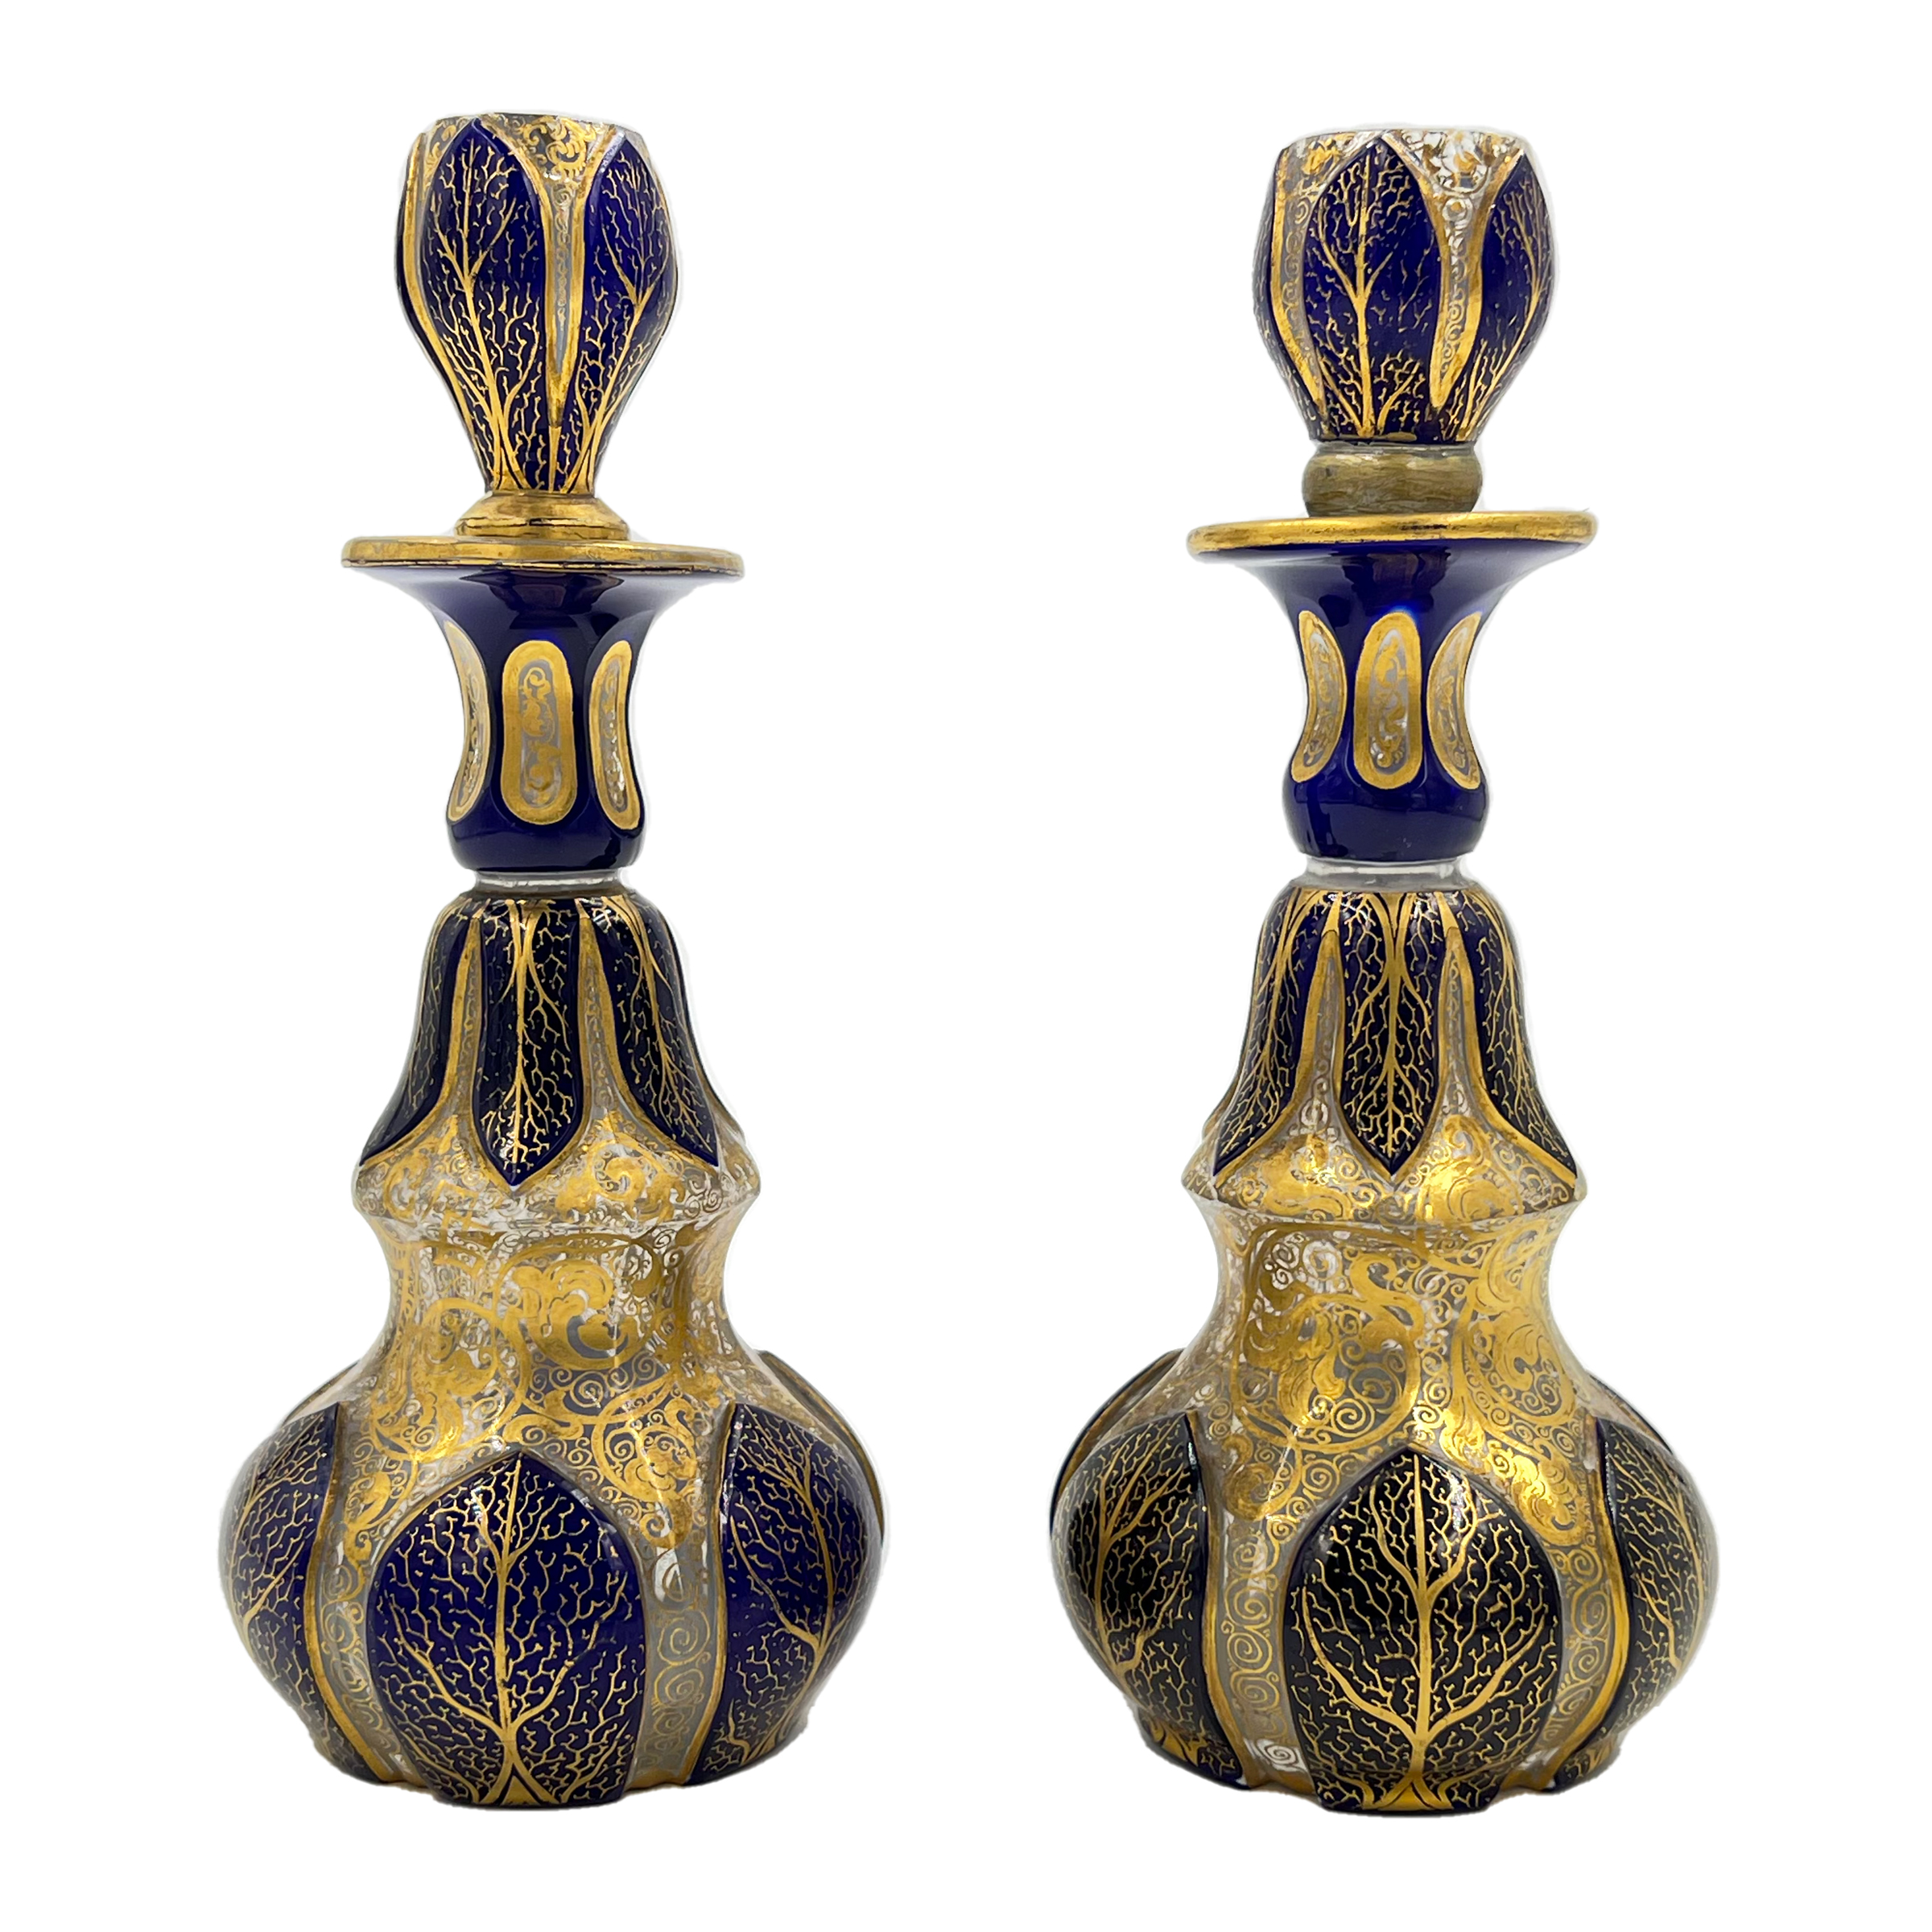 TWO BOHEMIAN GLASS PERFUME BOTTLES WITH BLUE AND GOLD GILDING